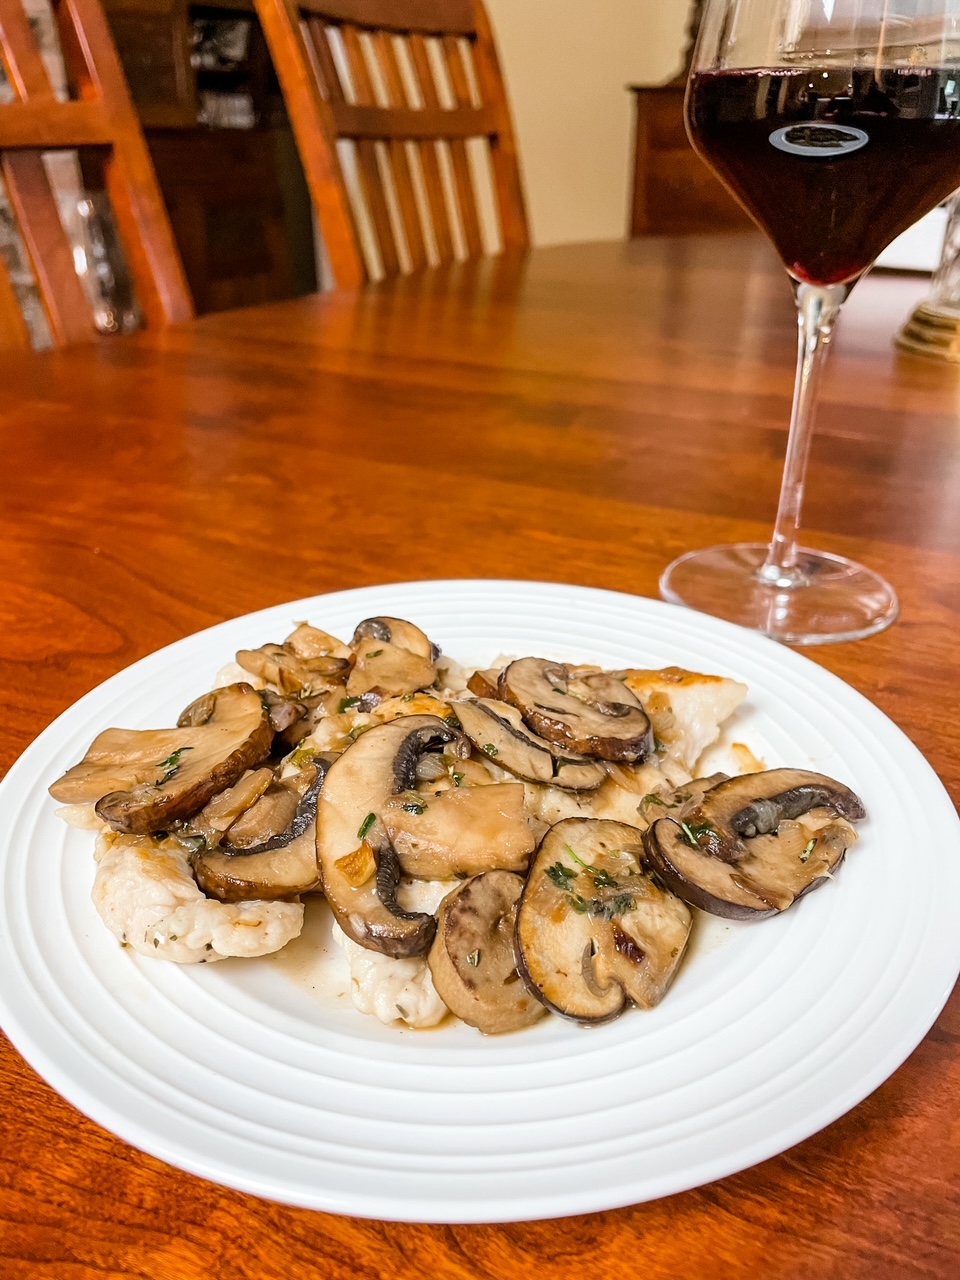 The completed Healthier Chicken Marsala alongside a glass of wine